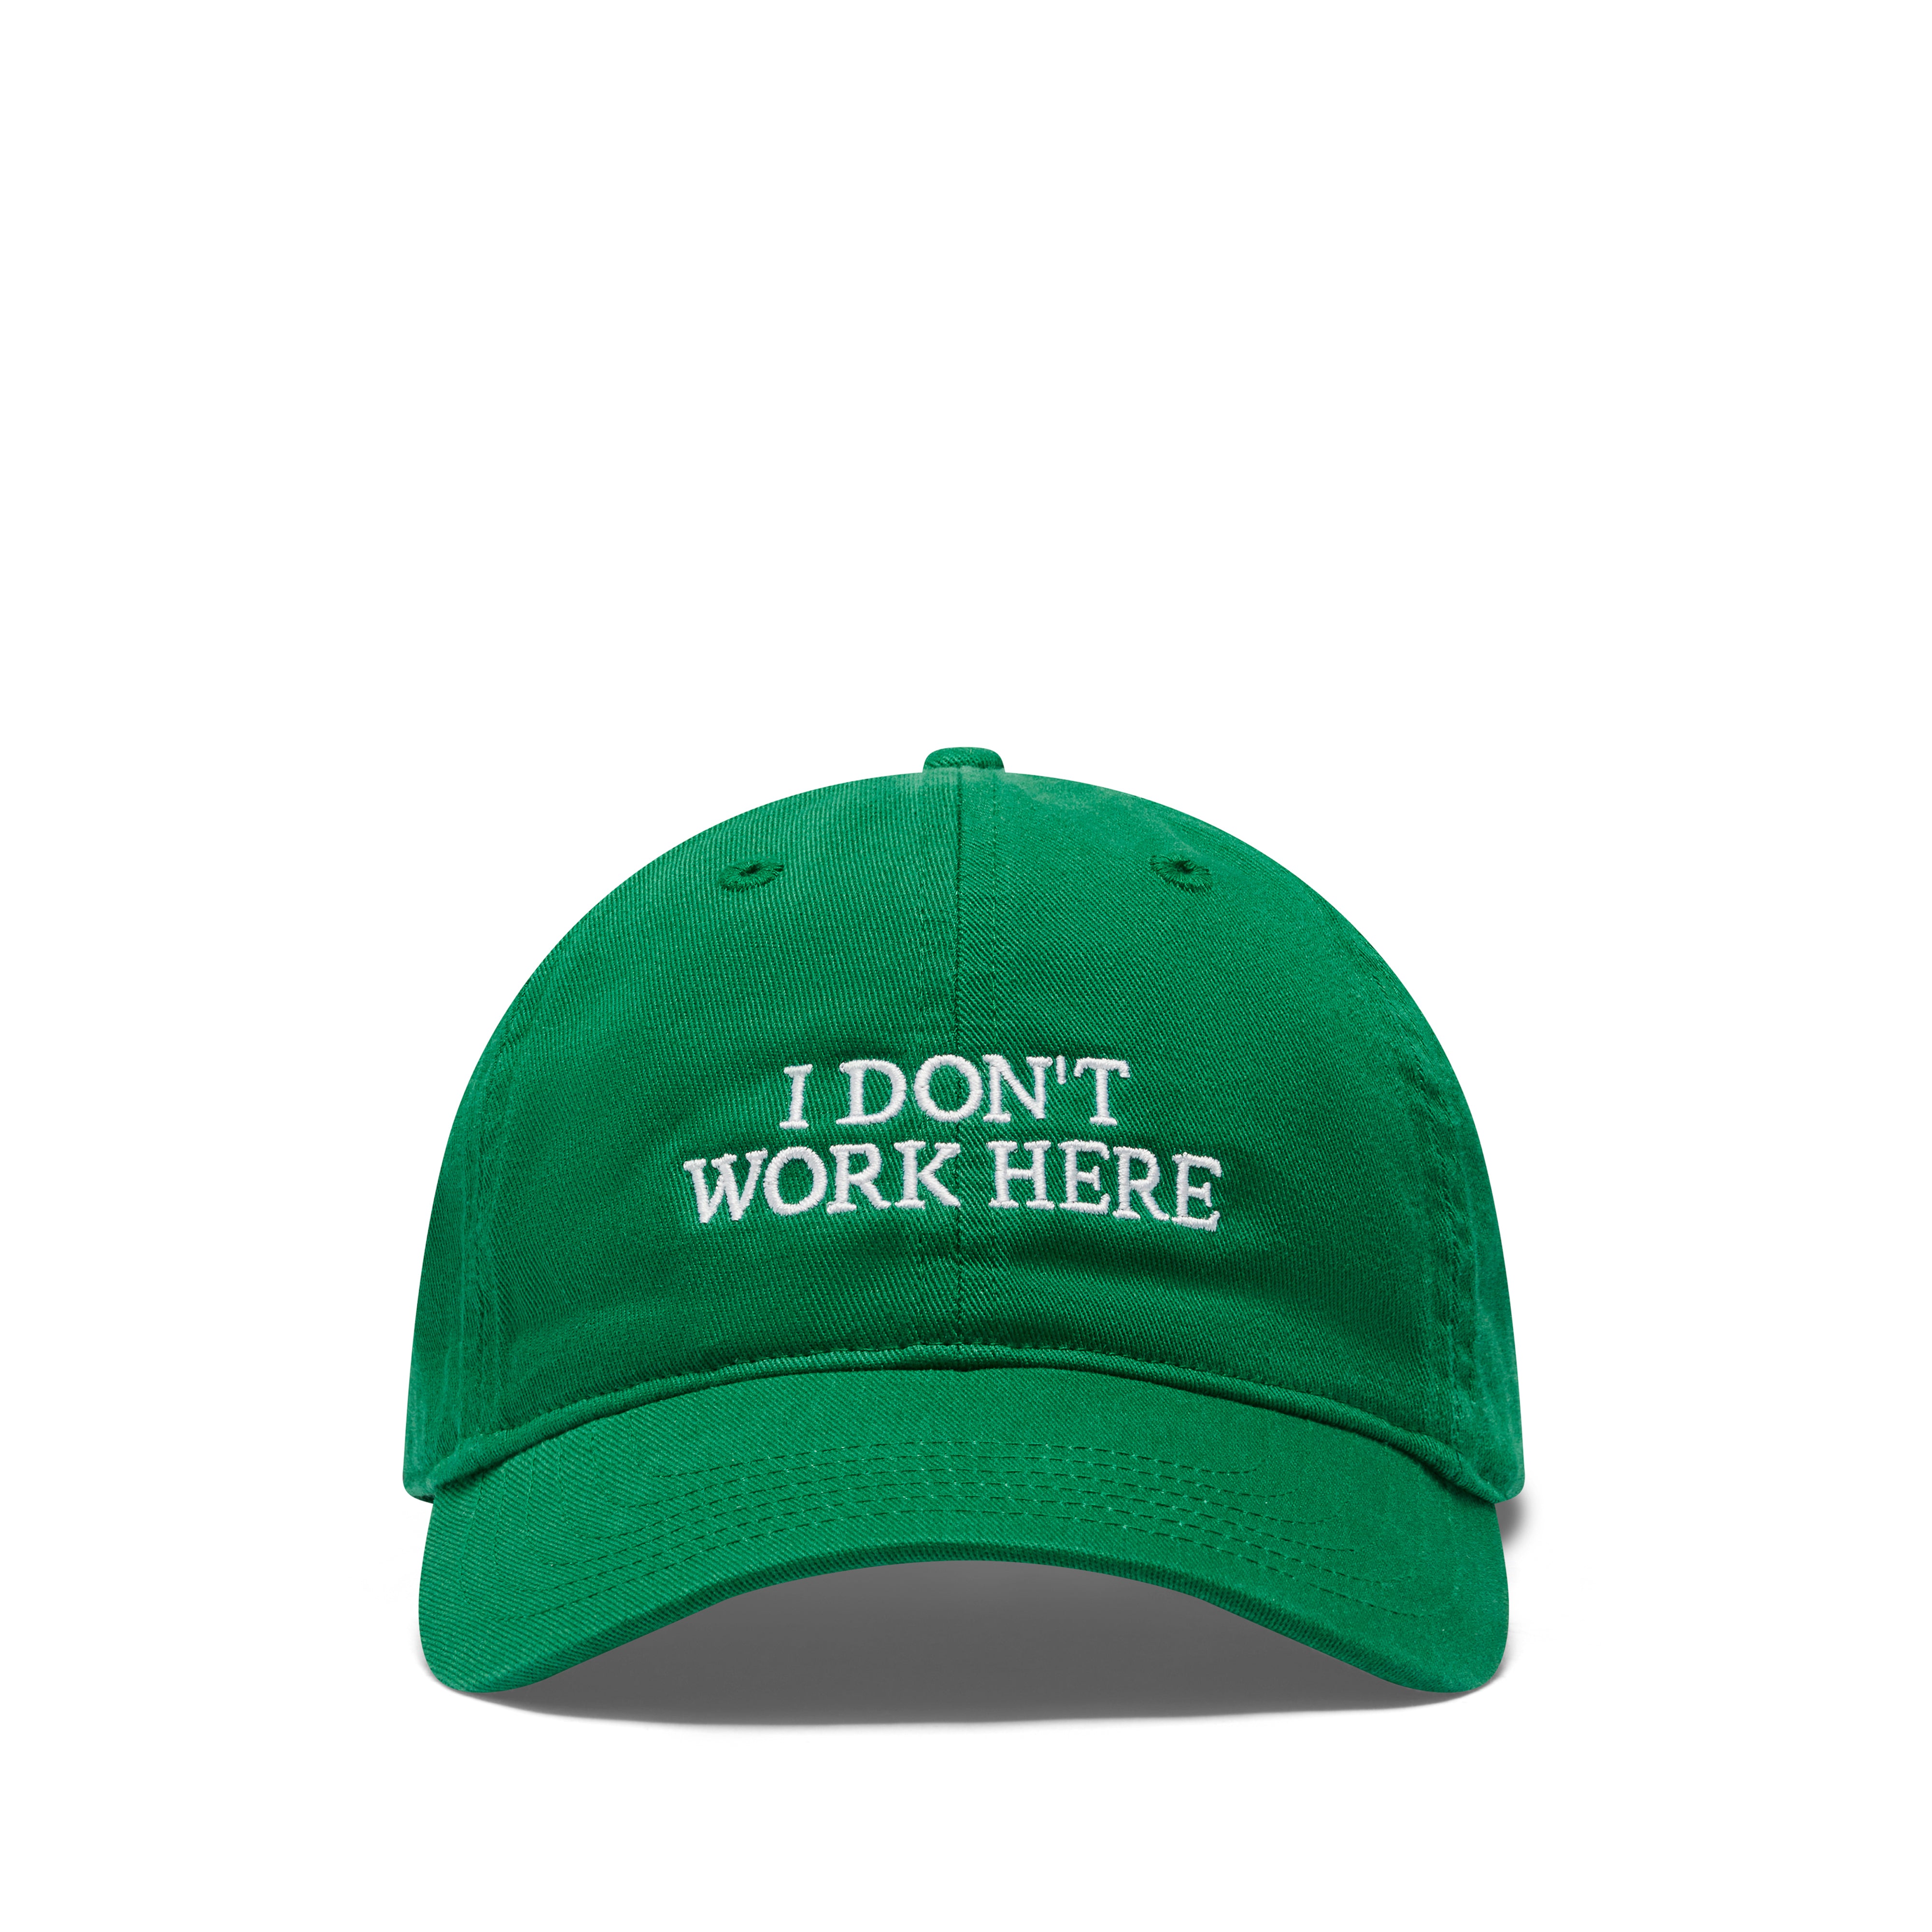 Idea Books - Sorry I Don't Work Here Hat - (Green)